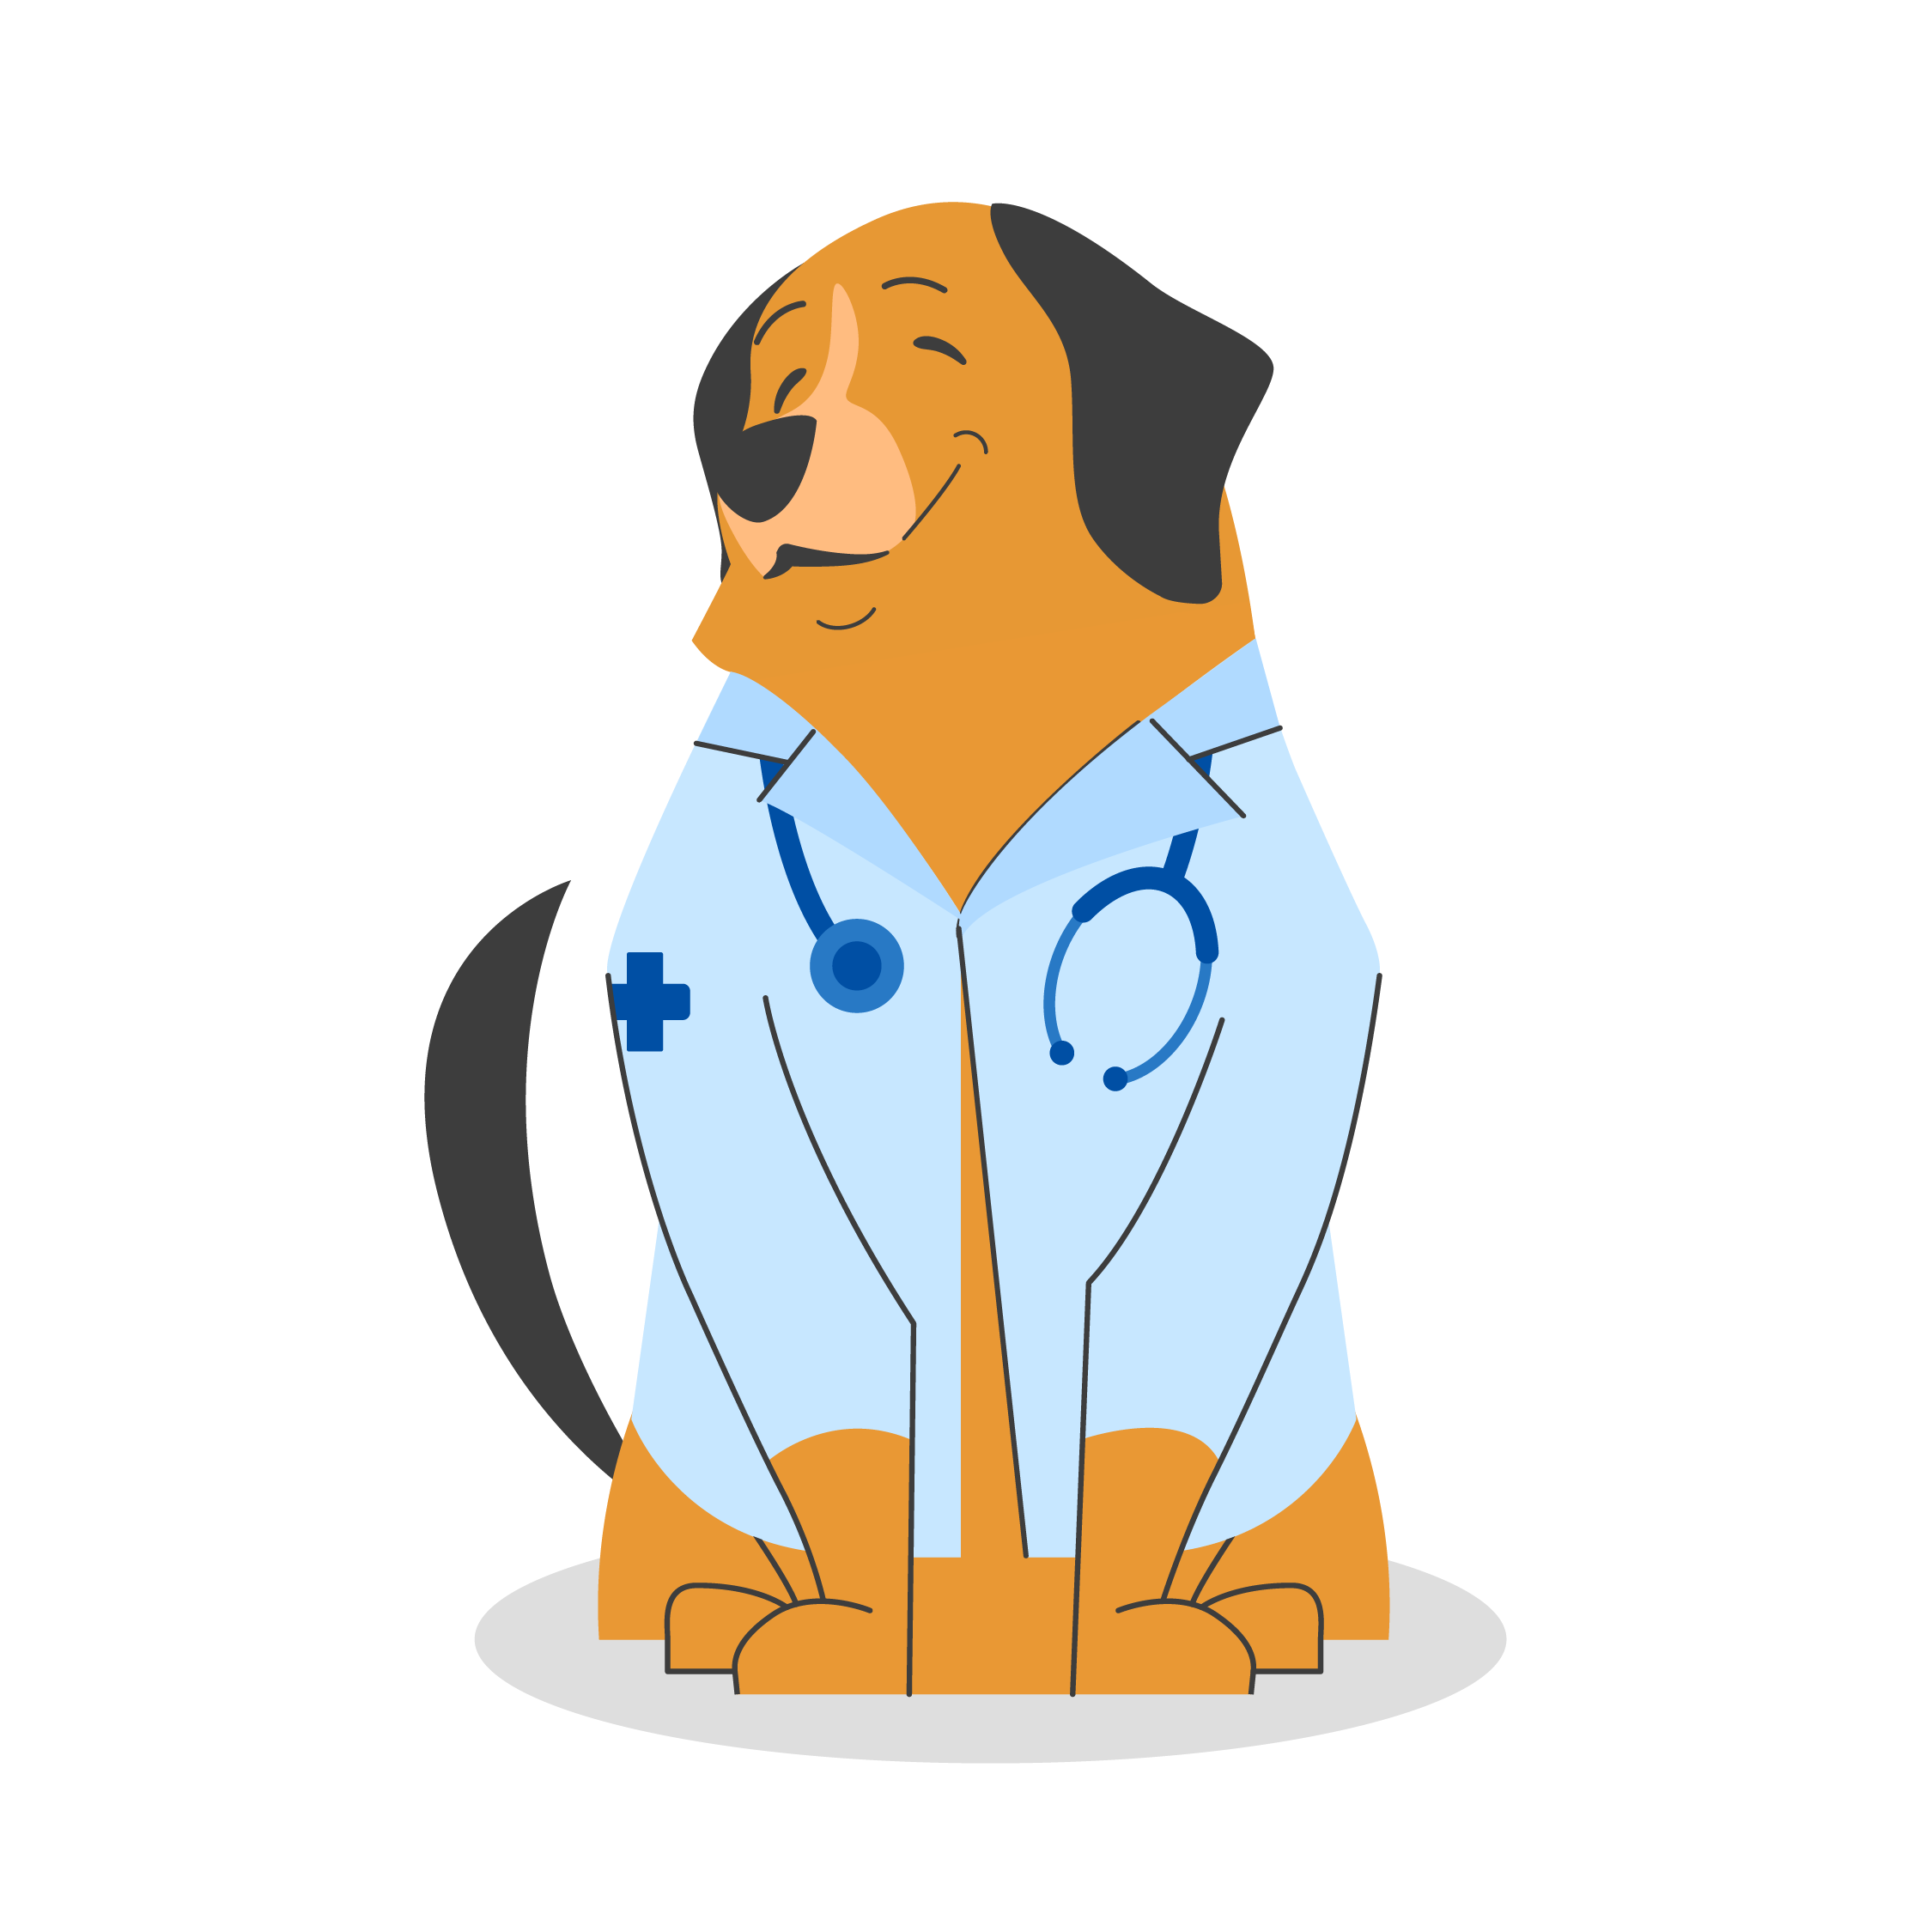 animated dog sitting and smiling with a blue lab coat and stethoscope around neck